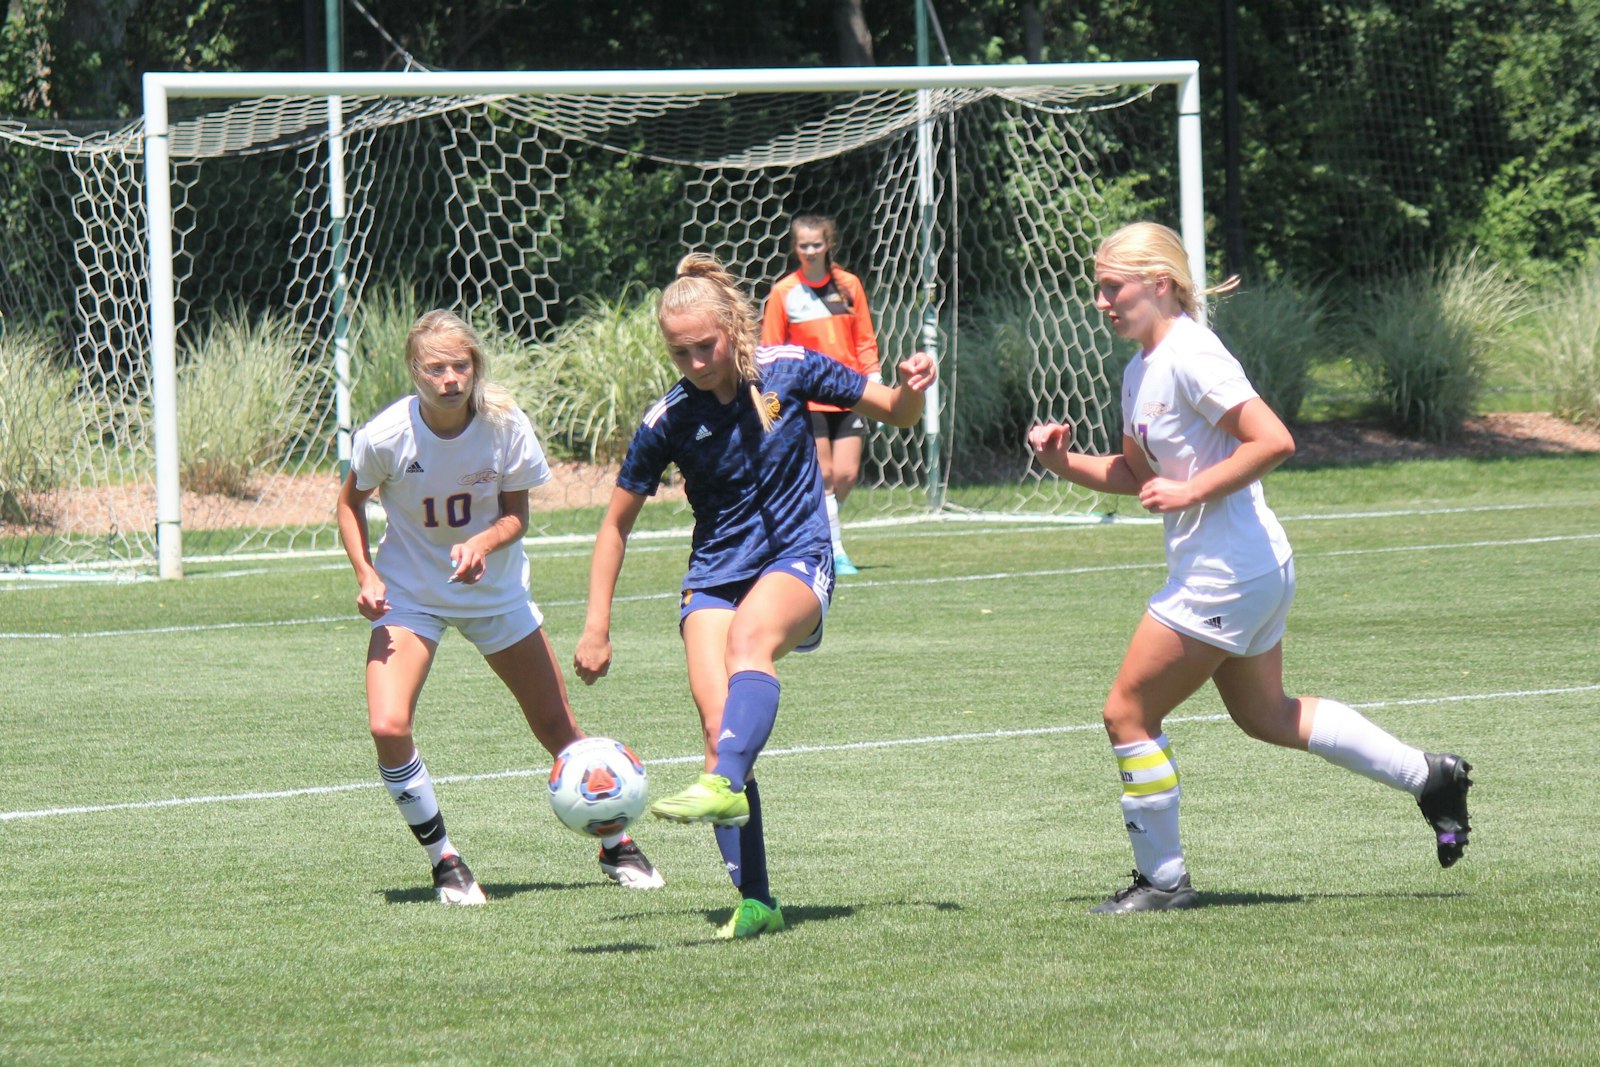 Junior Norah Tisko’s goal in the opening minute of the second half proved to be the game-winner as Royal Oak Shrine captured its second state soccer championship since 2019, 1-0 over Kalamazoo Christian.